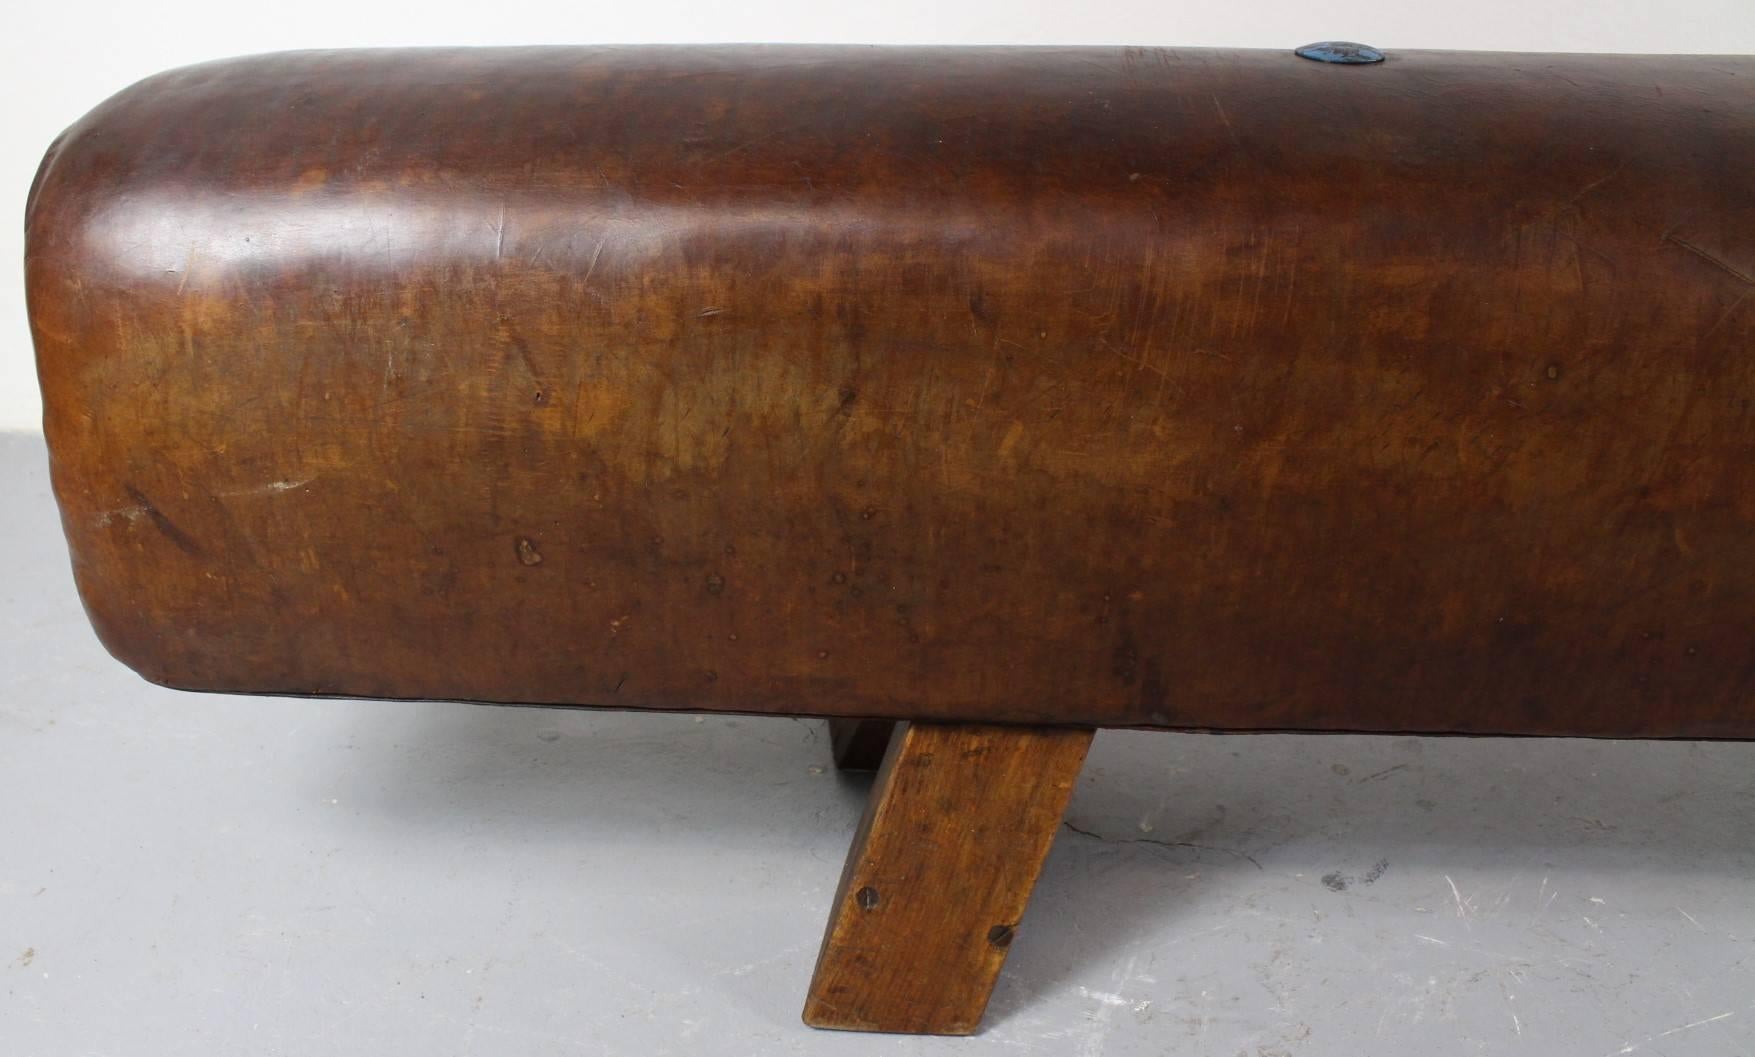 Leather gym pommel horse from the 1930s. It is in good original condition.